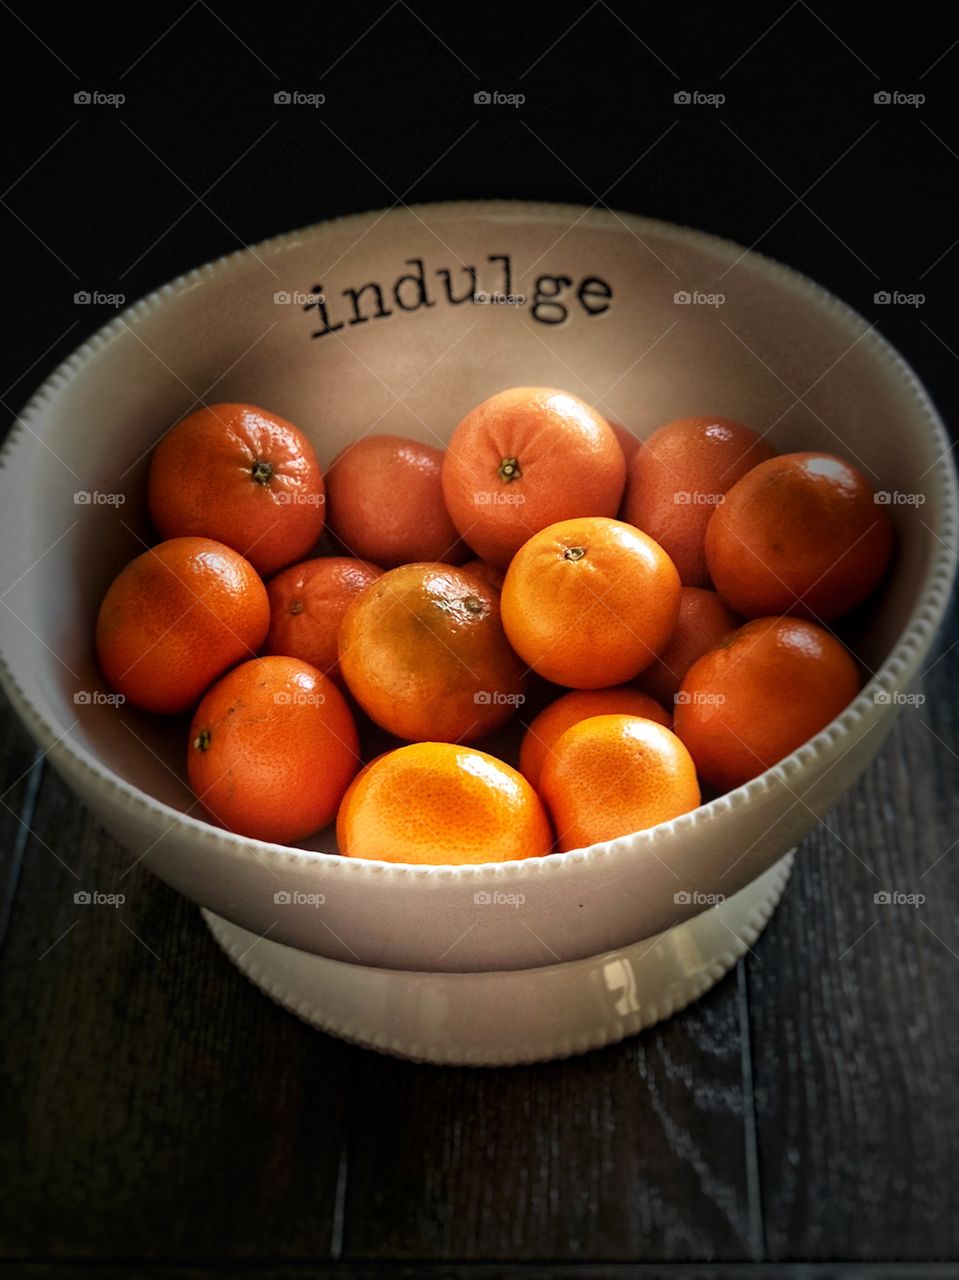 Indulge in Fruits! Magnificent Tangerines! Perfect Healthy Marketing Shot!